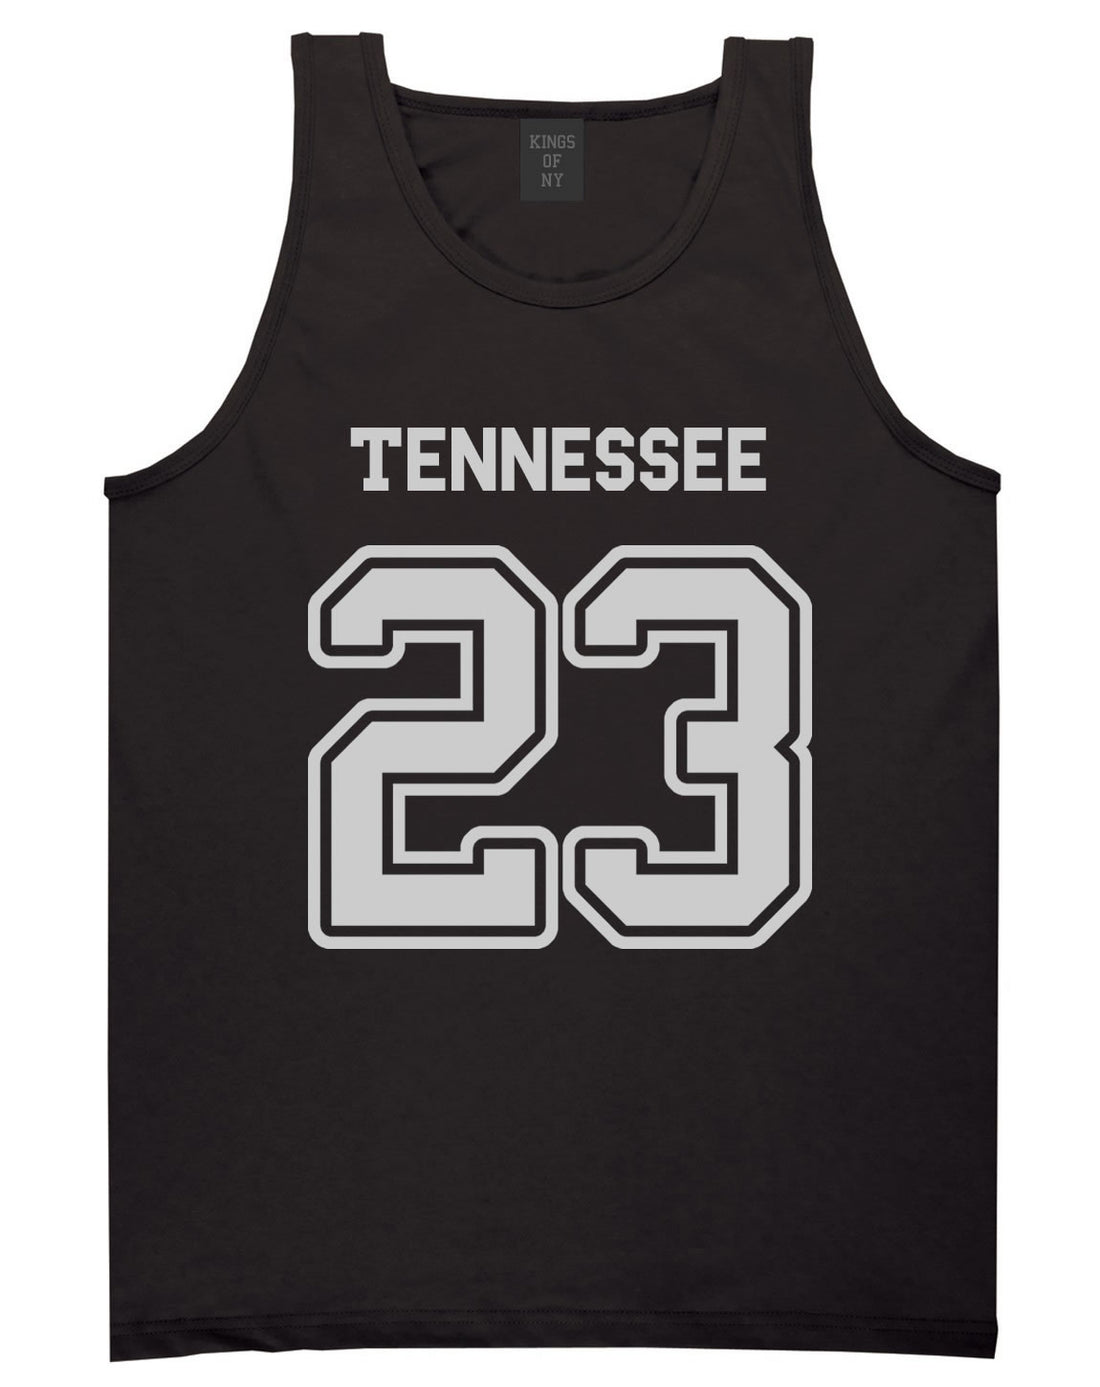 Sport Style Tennessee 23 Team State Jersey Mens Tank Top By Kings Of NY